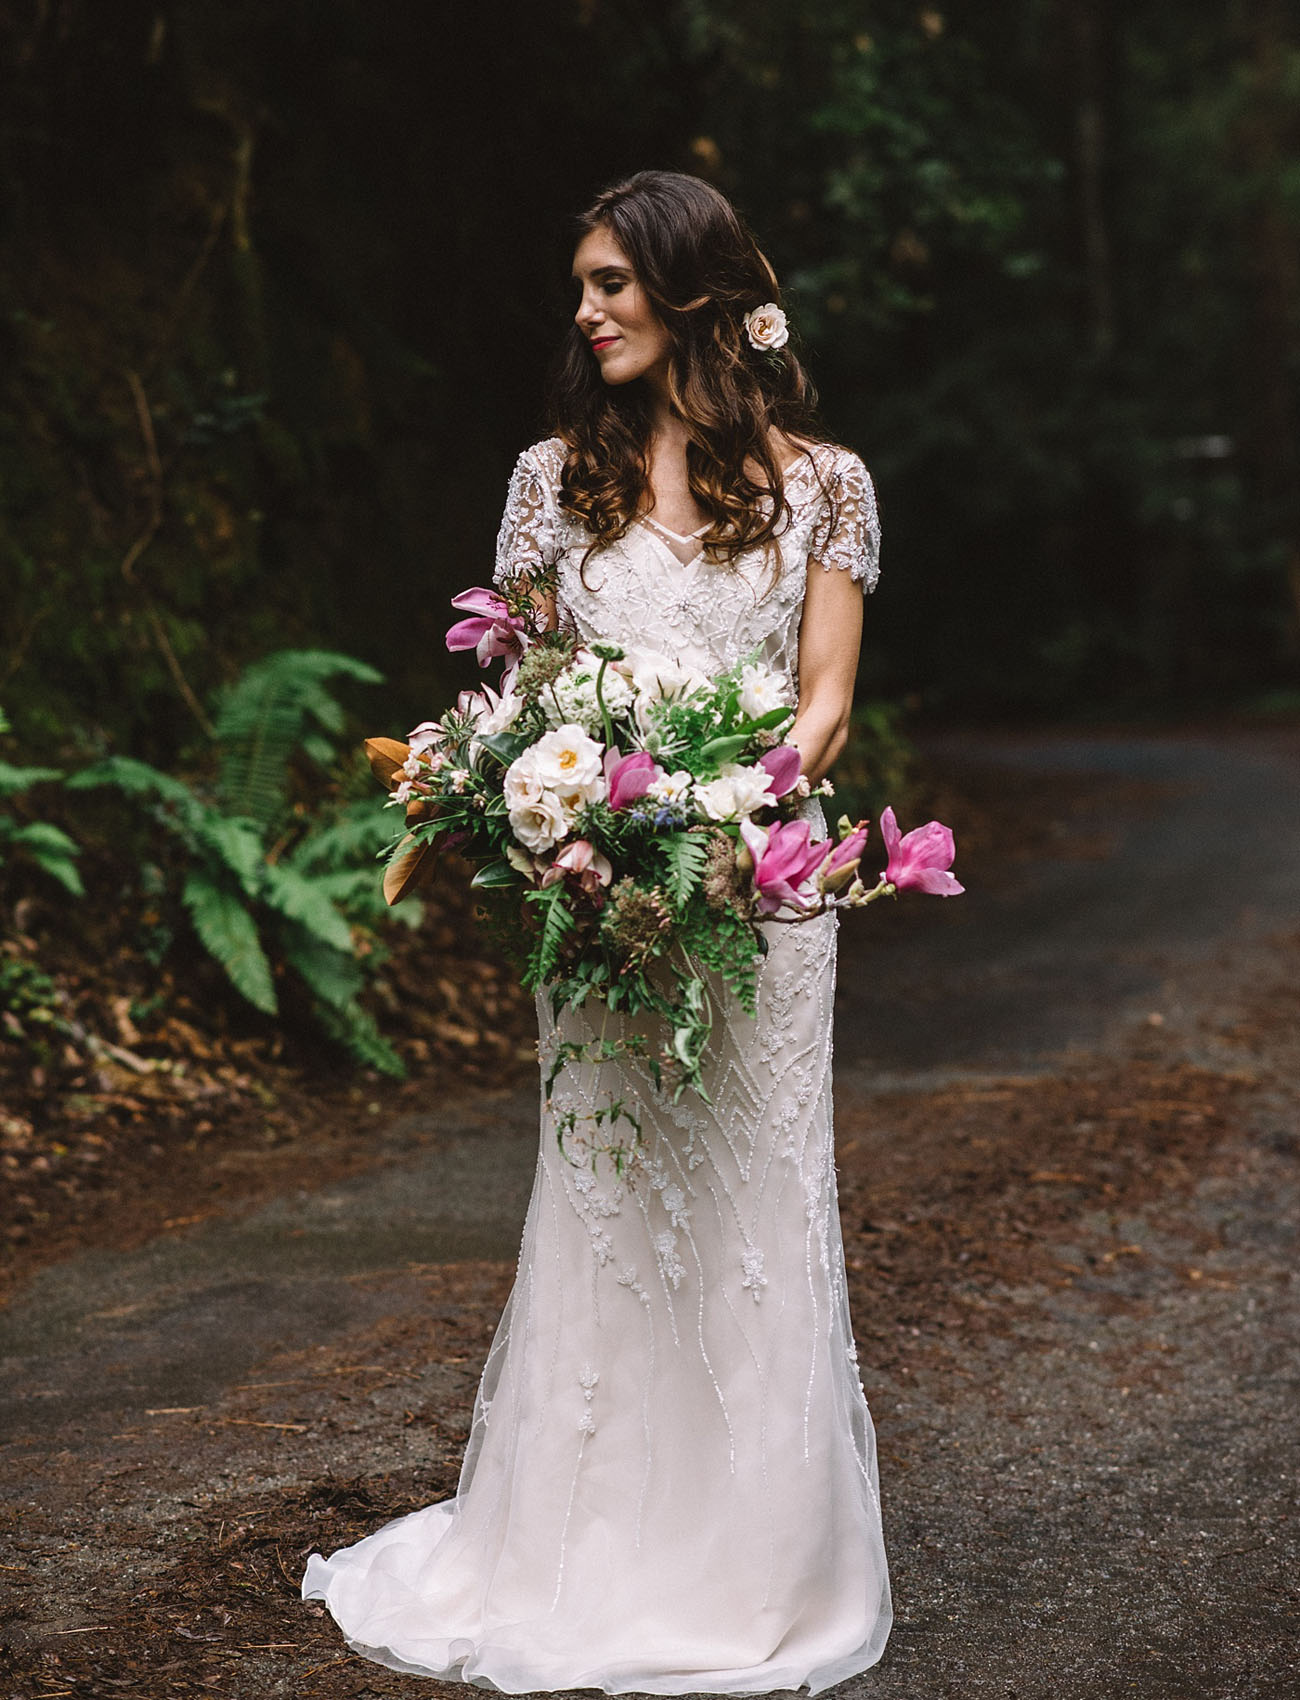 07 The bride is rocking a gorgeous BHLDN wedding dress, with intricate silver embroidery